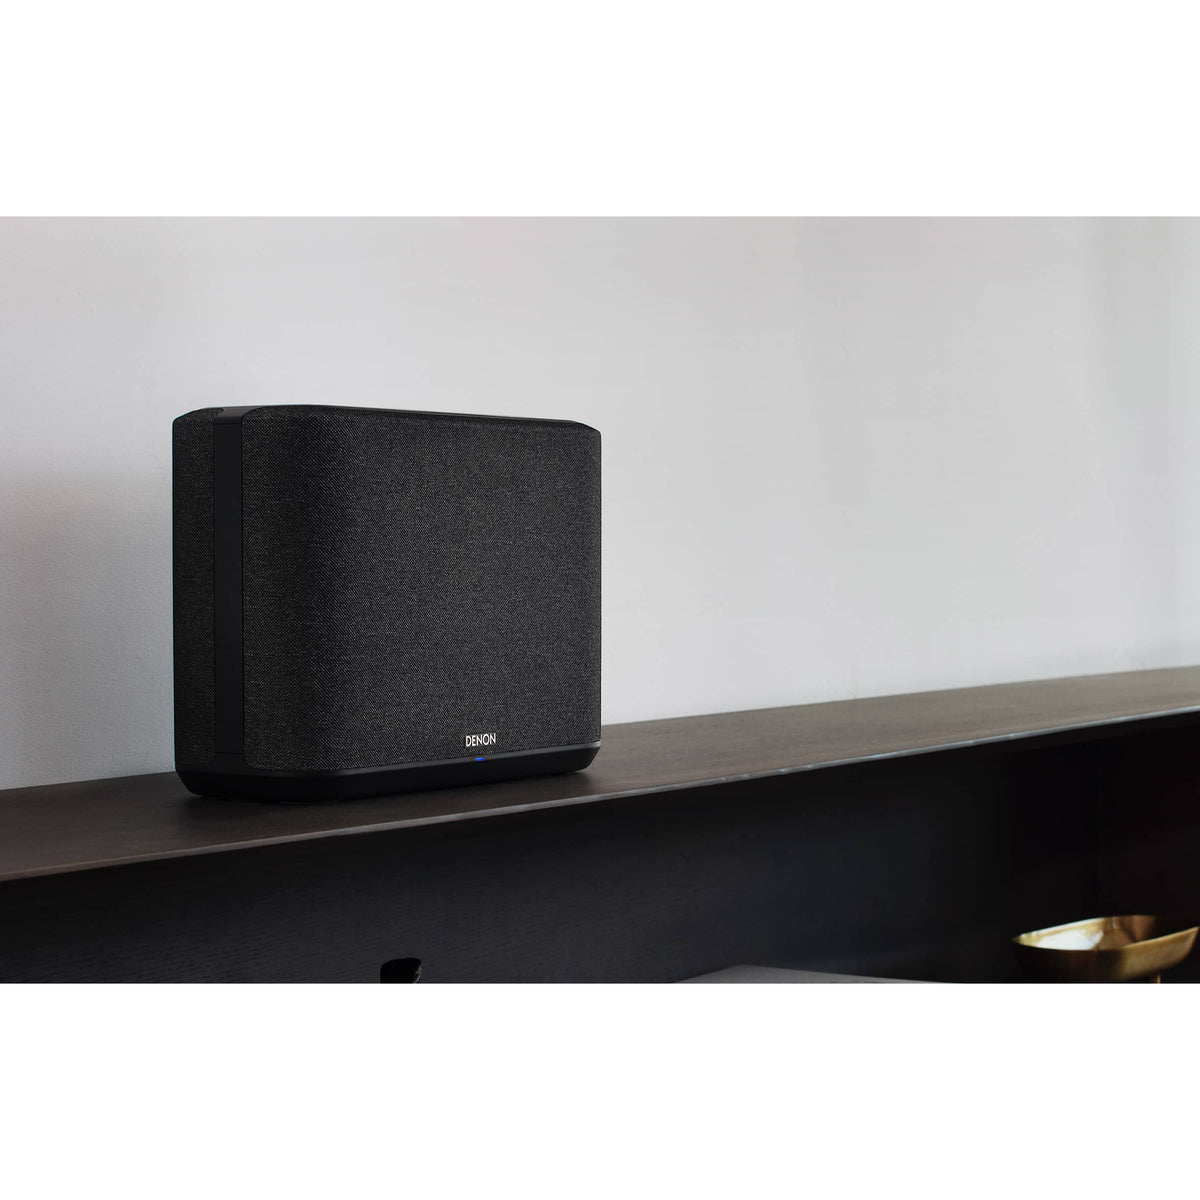 Denon Home 250 Wireless Smart Multiroom Speaker with Built-In HEOS - Black | DENONHOME250BKE2GB from Denon - DID Electrical